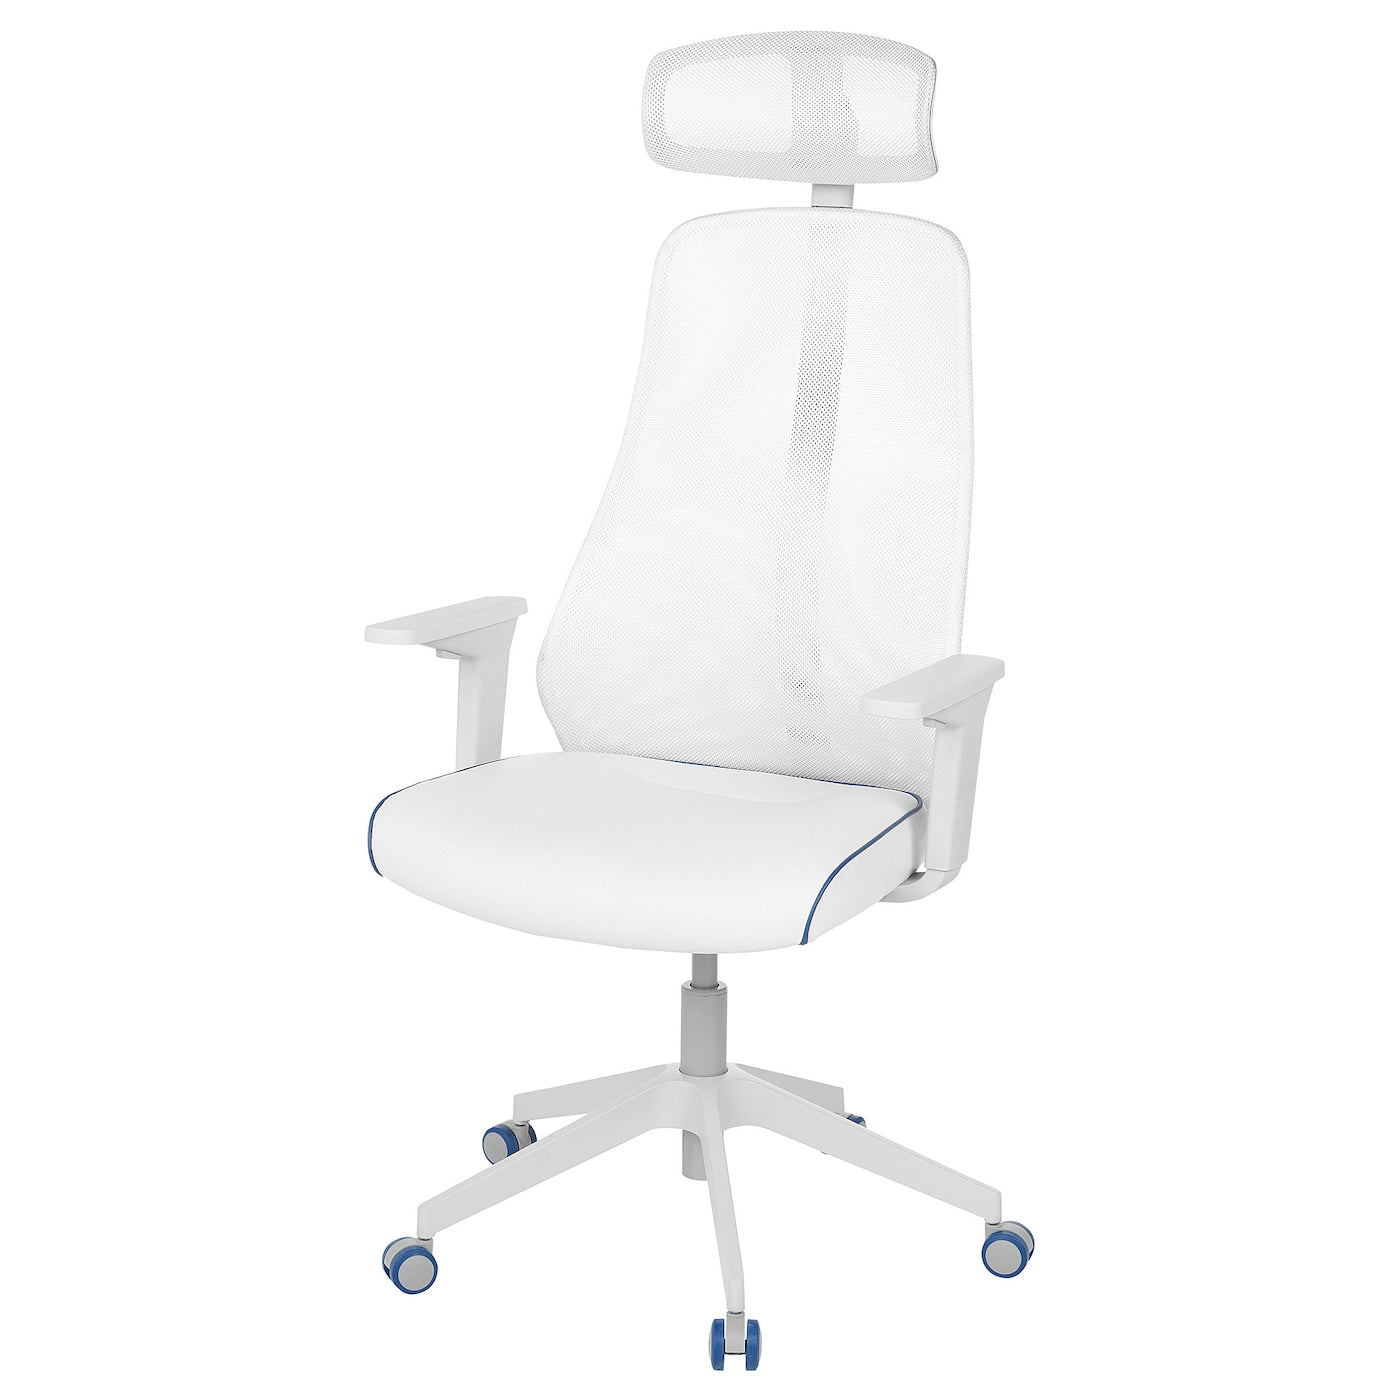 MATCHSPEL Gaming Chair, Bomstad White